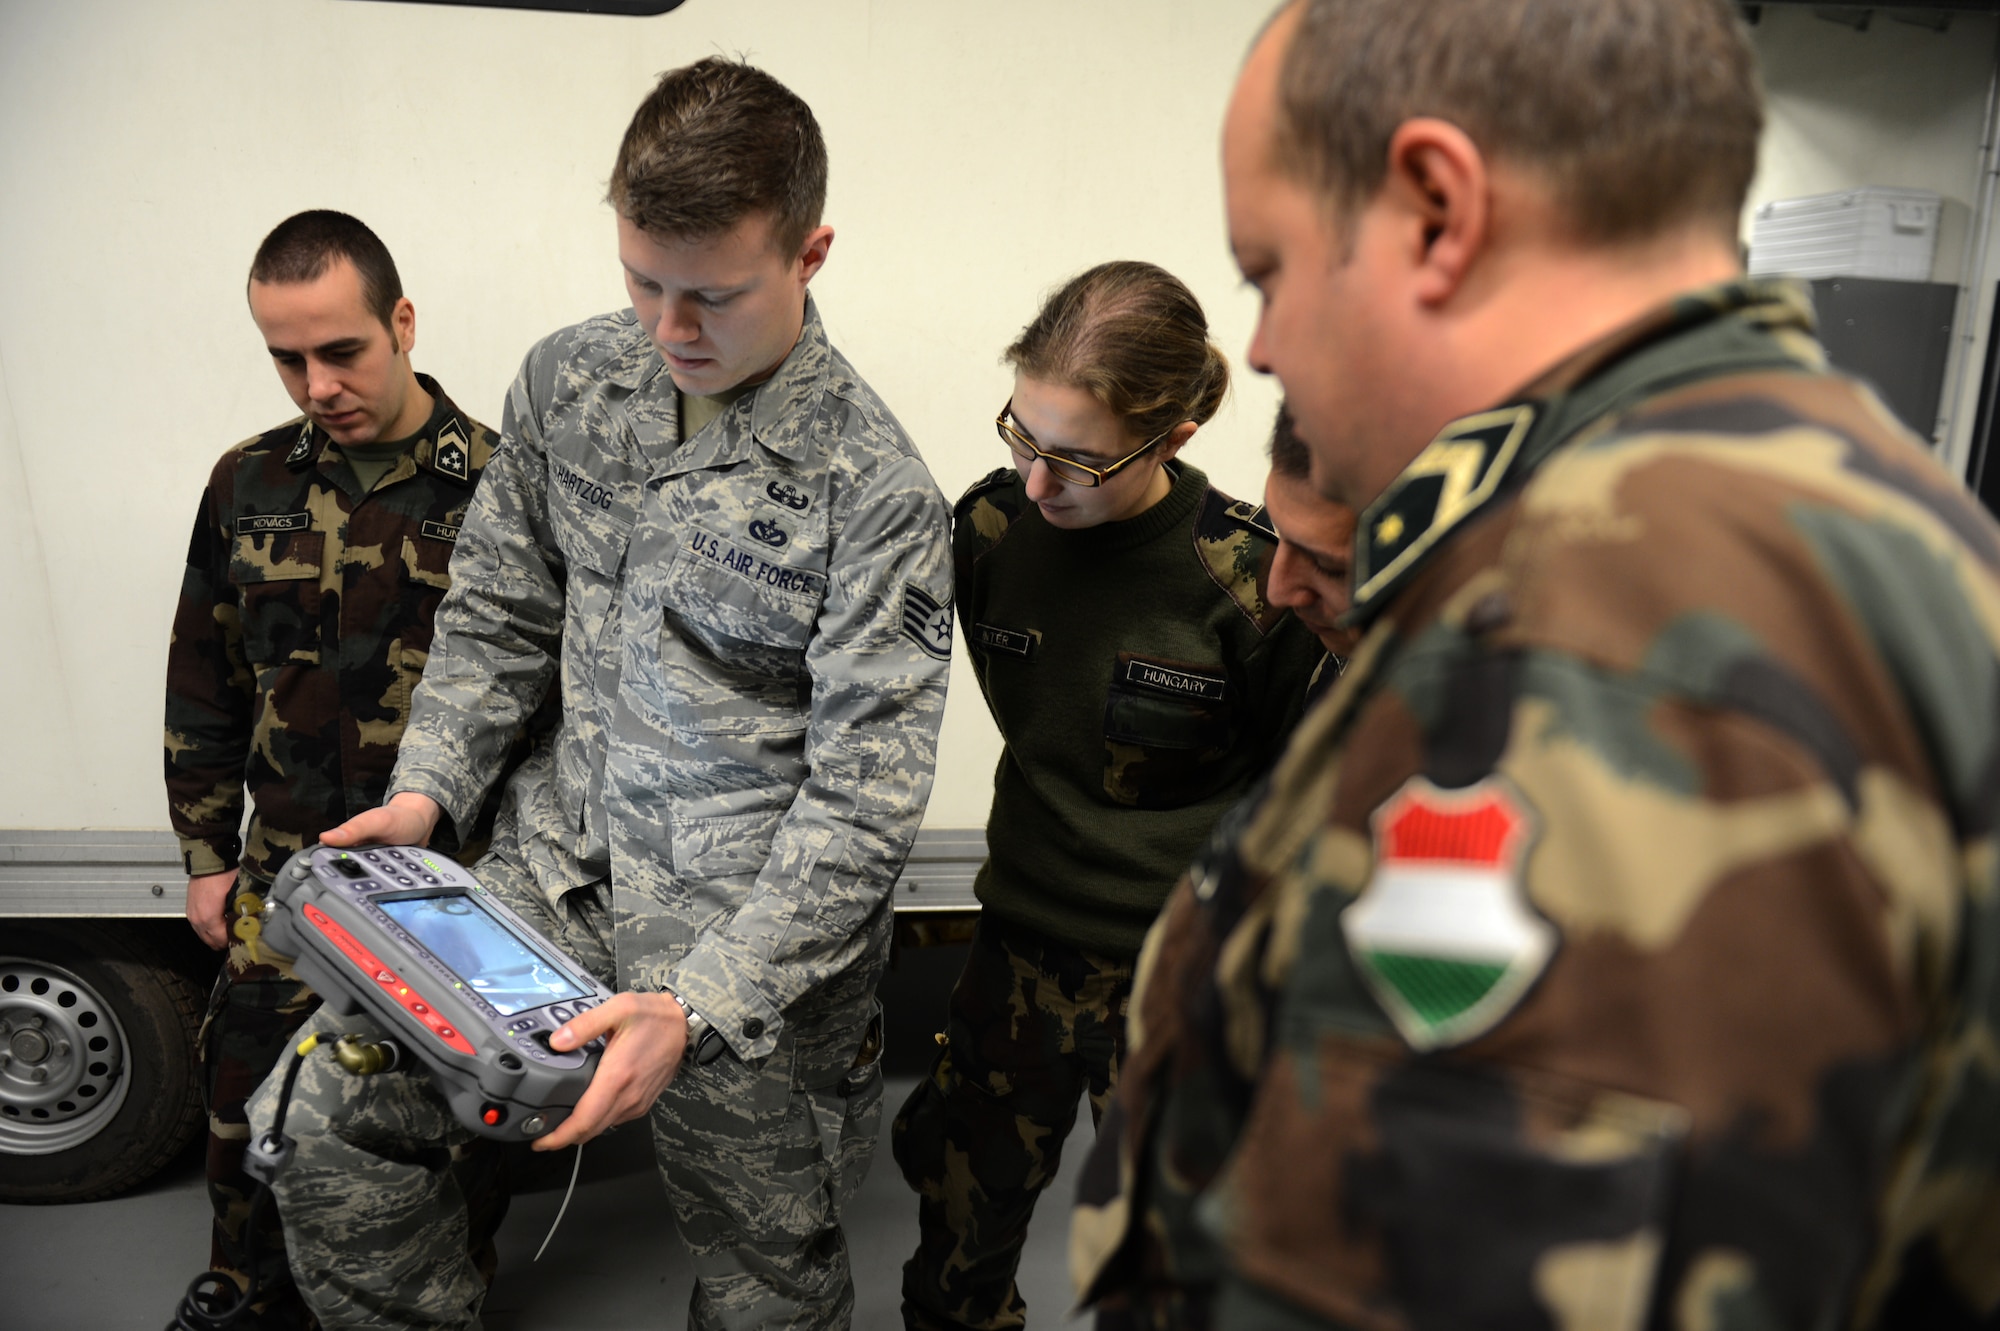 SPANGDAHLEM AIR BASE, Germany – U.S. Air Force Staff Sgt. Paul Hartzog, 52nd Civil Engineer Squadron Explosive Ordnance Disposal technician from Buford, Ga., trains members of the Hungarian army on how to operate a Remotec HD-2 remote control military robot at the EOD shop Dec. 4, 2012.  Hungarian army members visited Spangdahlem Air Base to join forces in teaching information on the most current threats in contingency operations across the globe. Unmanned vehicles like the HD-2 are used to dispose of ordnance without the risk of injury for the operator. (U.S. Air Force photo by Airman 1st Class Gustavo Castillo/Released)  